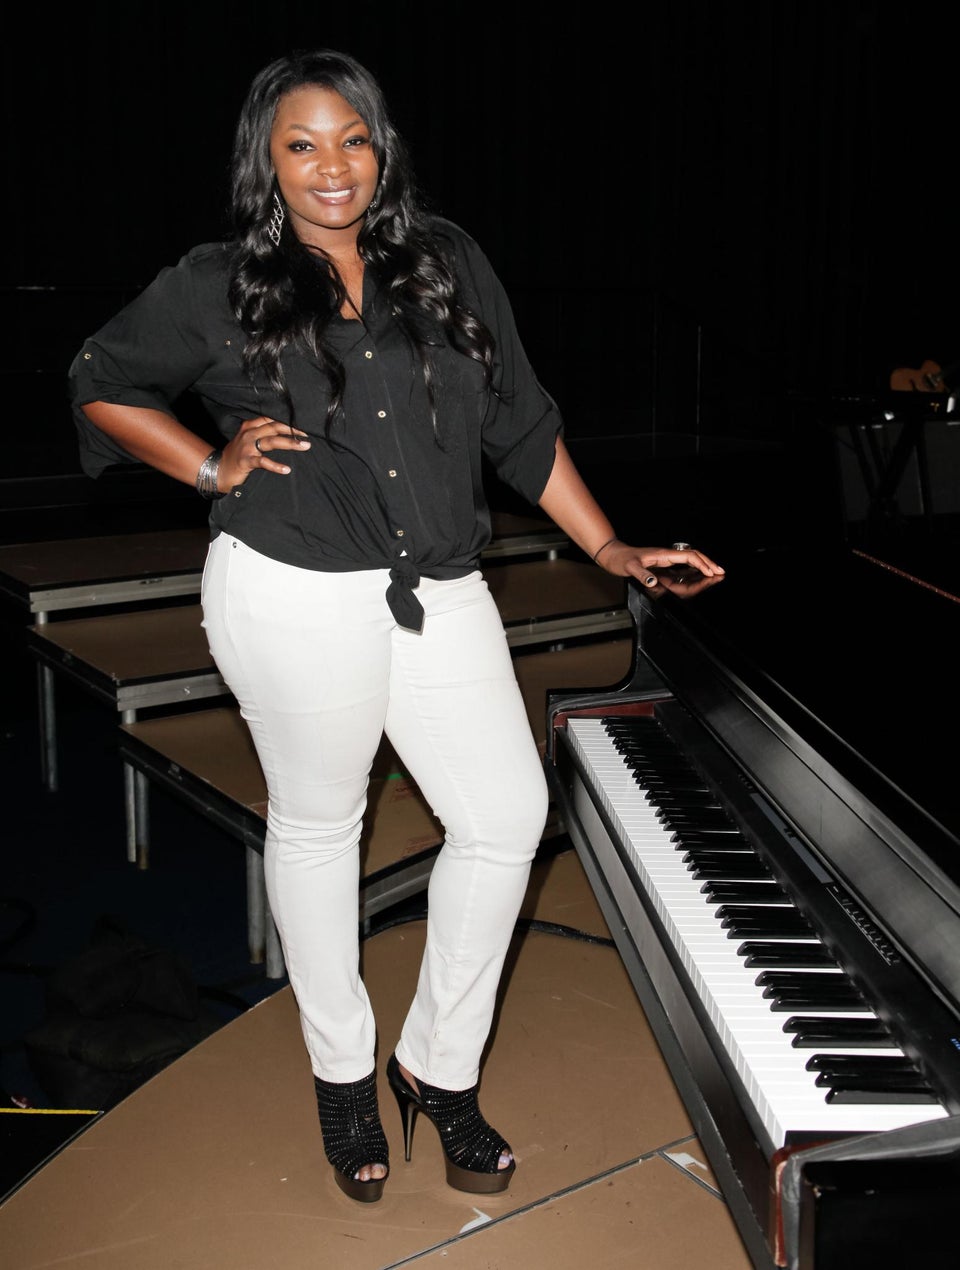 ‘American Idol’ Winner Candice Glover Drops 30 Pounds